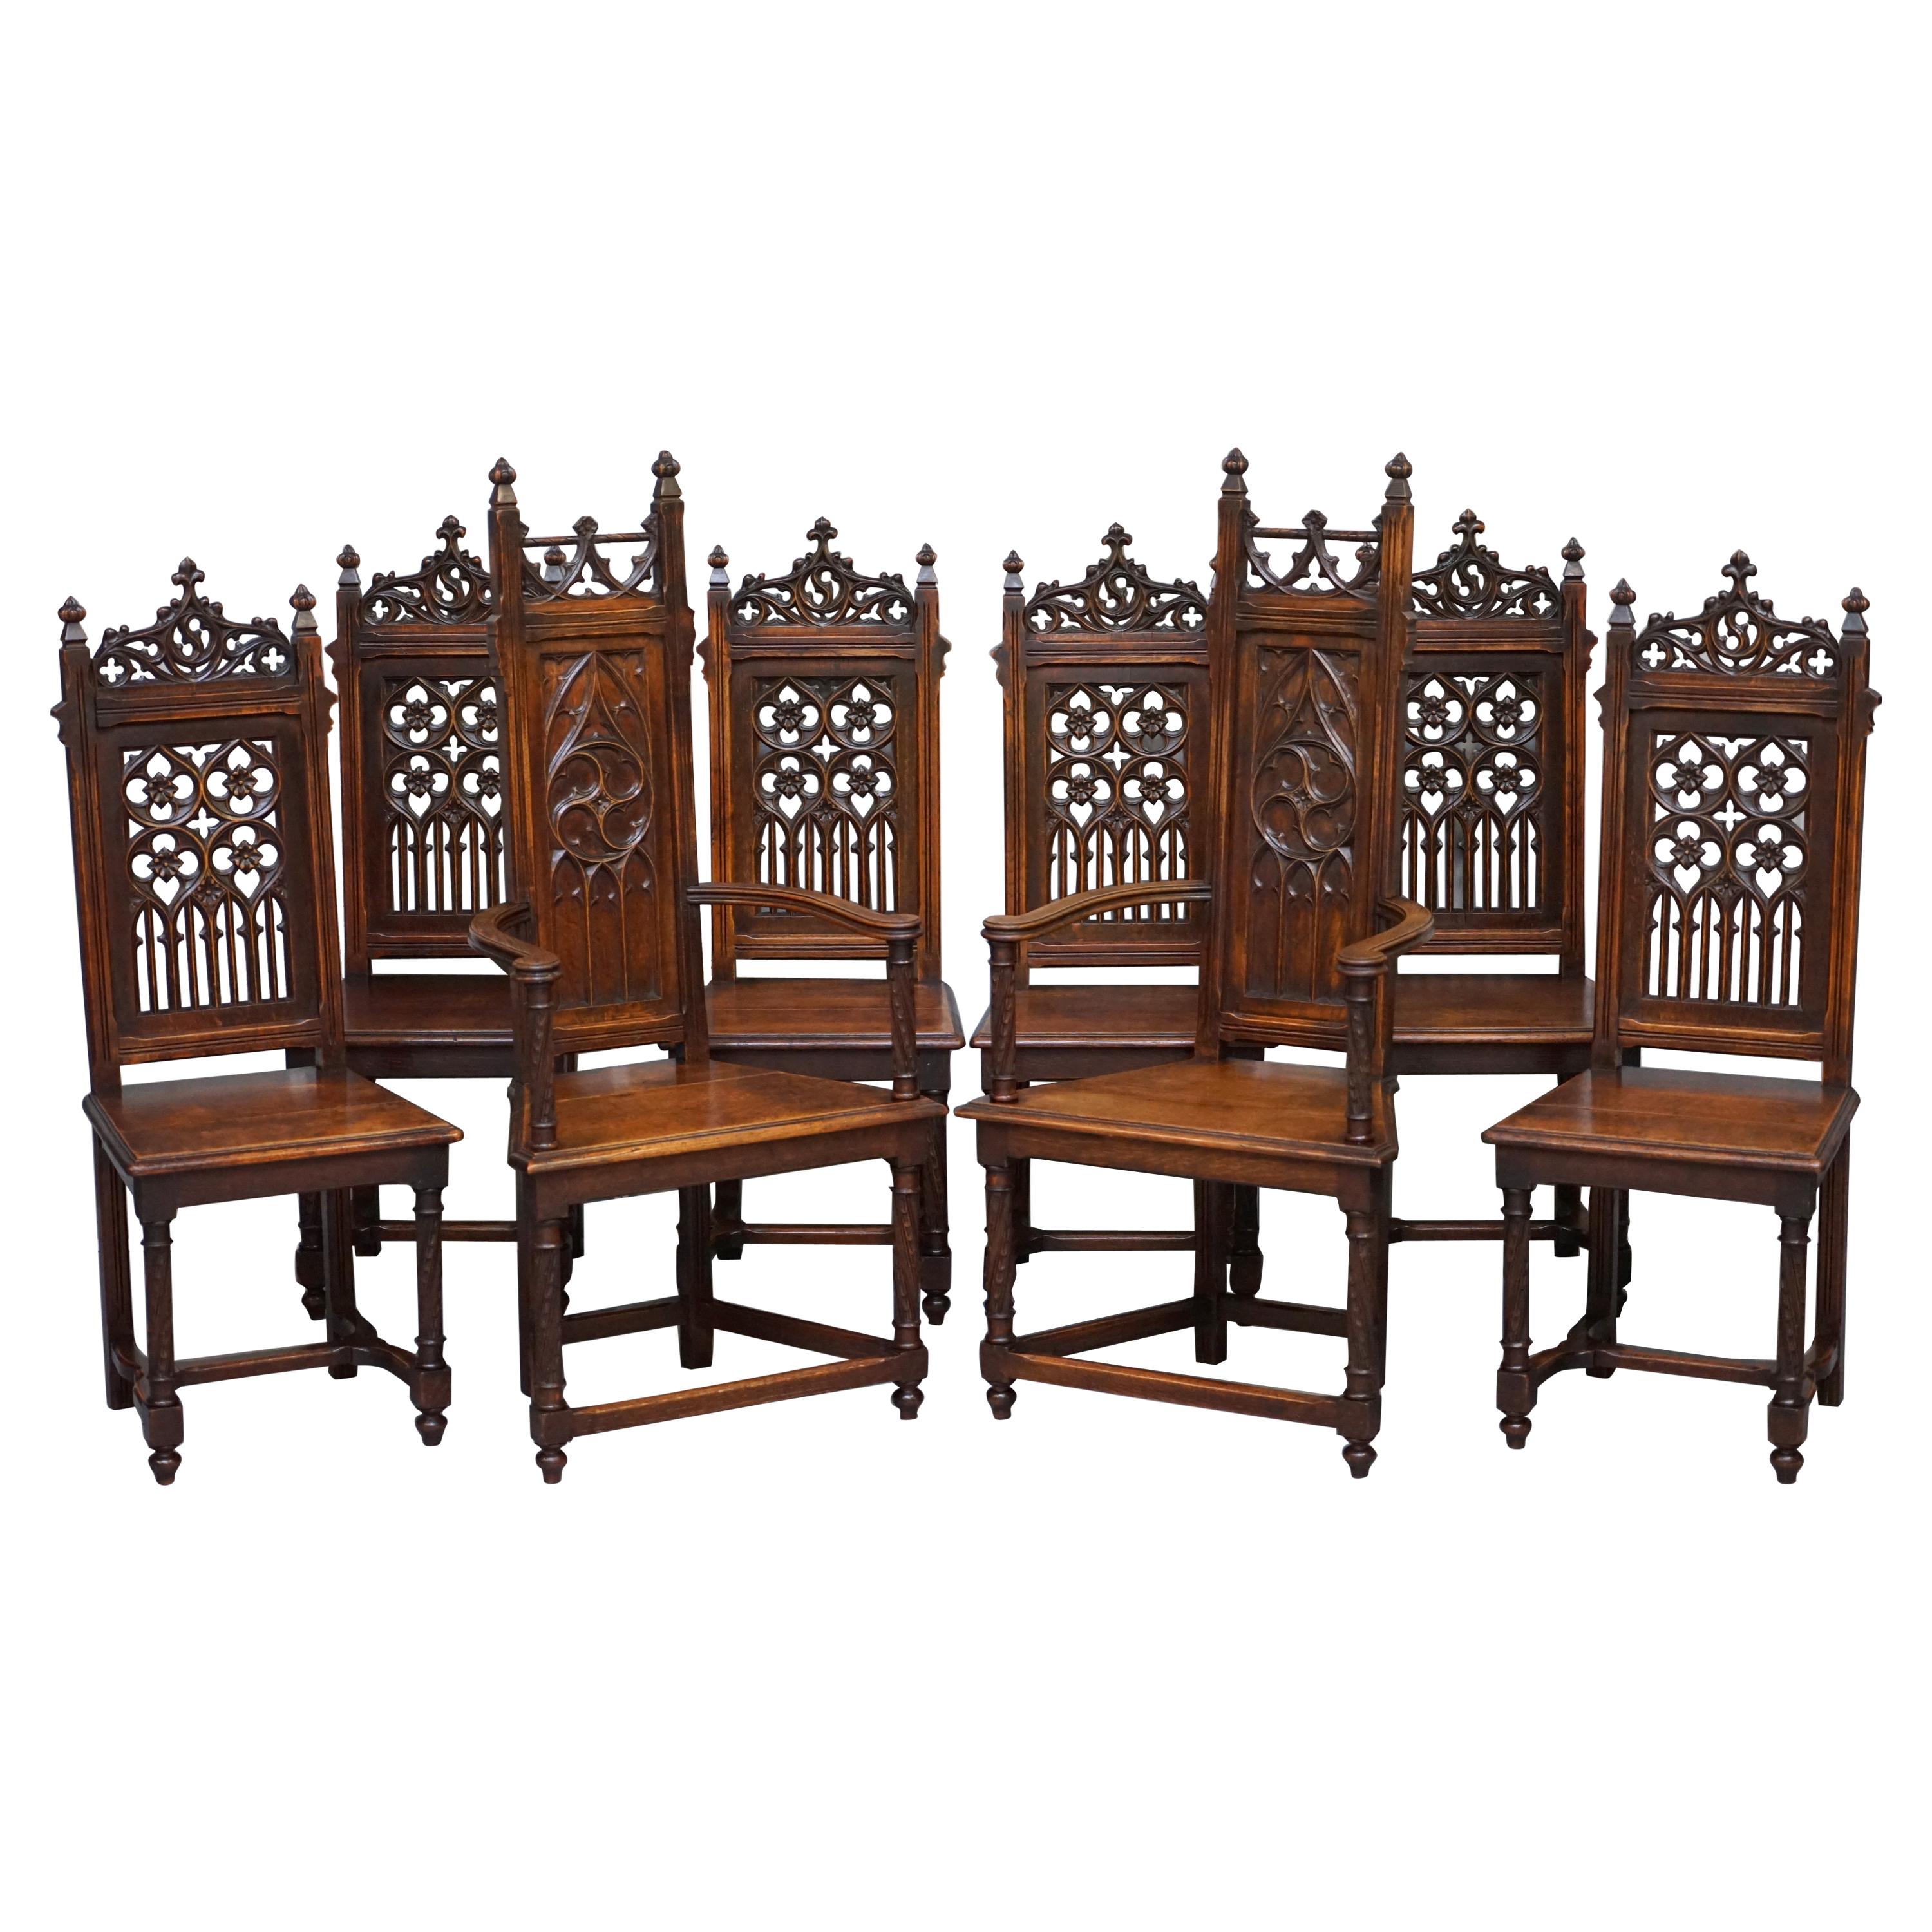 Set of Eight circa 1780 English Oak Gothic Revival High Back Dining Chairs 8 Set